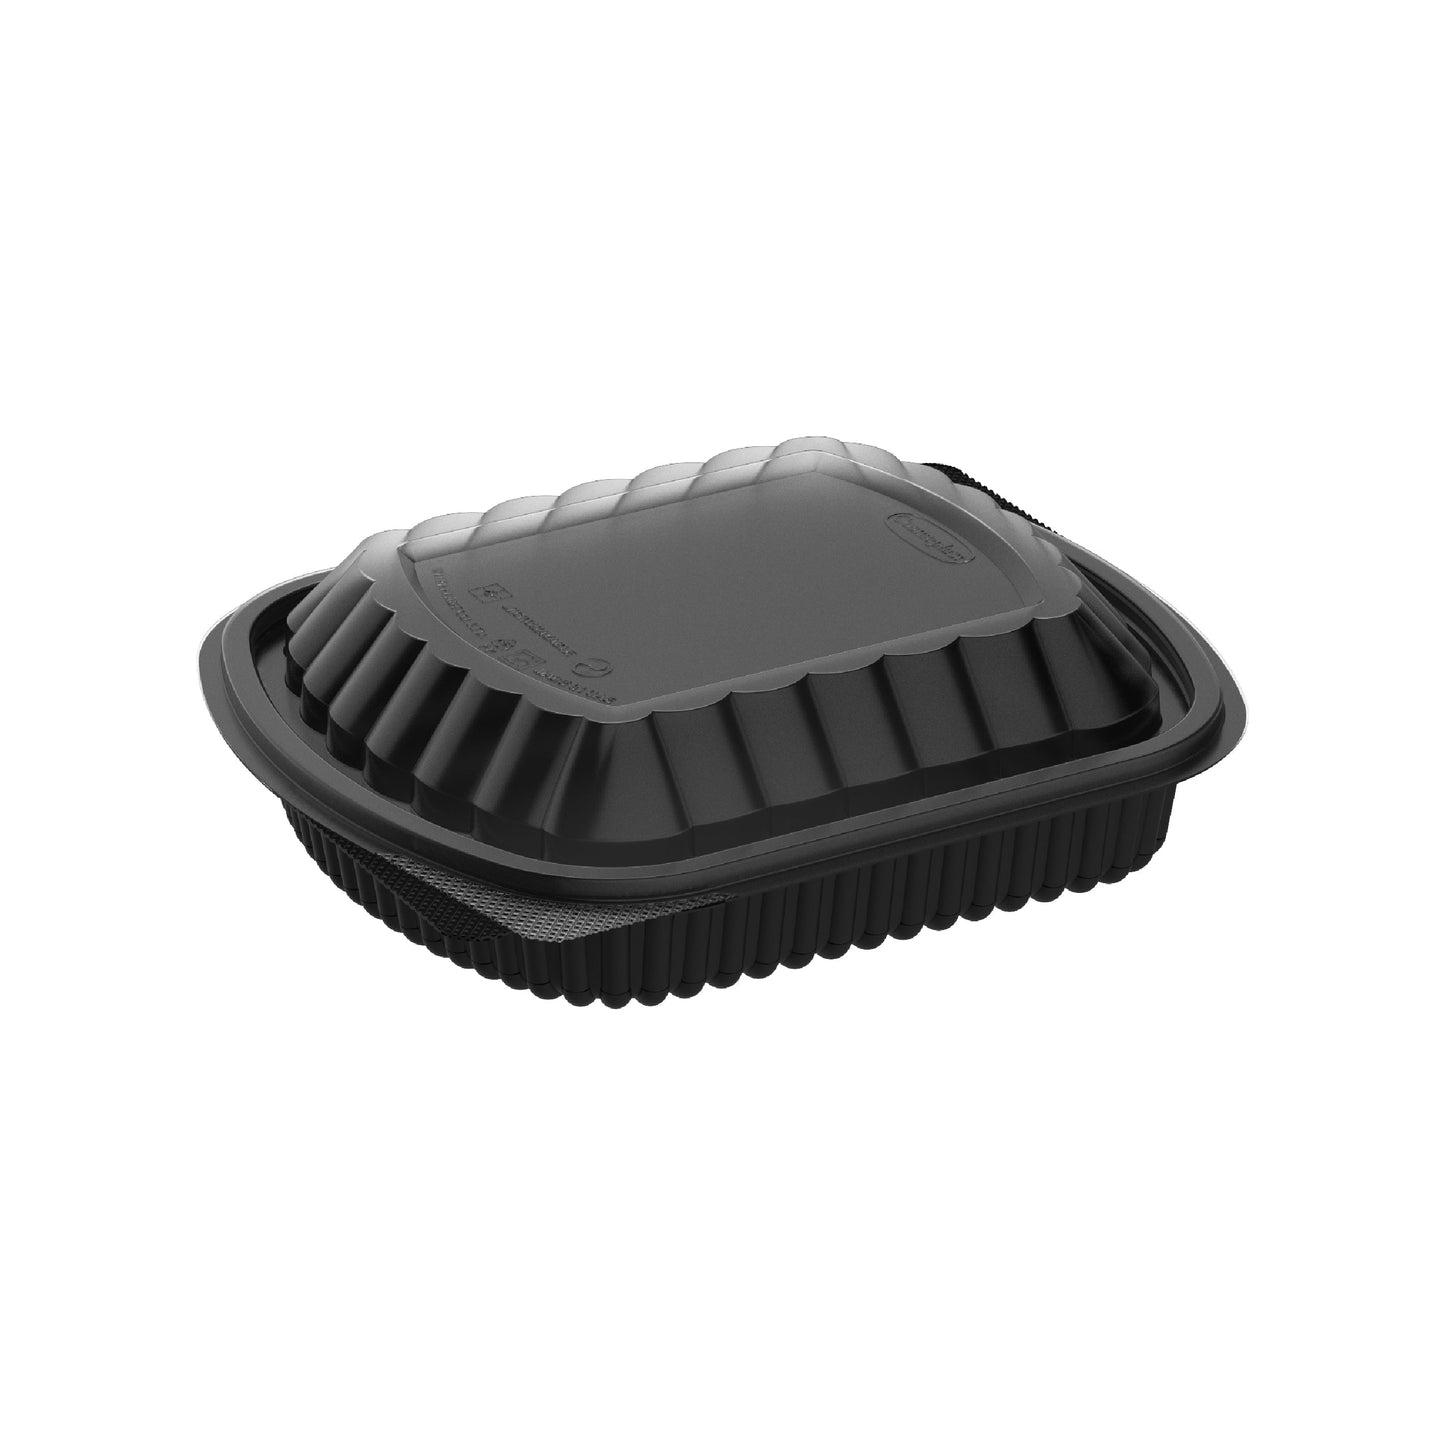 Wholesale Plastic Meal Tray 1 Compartment-Cosmoplast Oman 